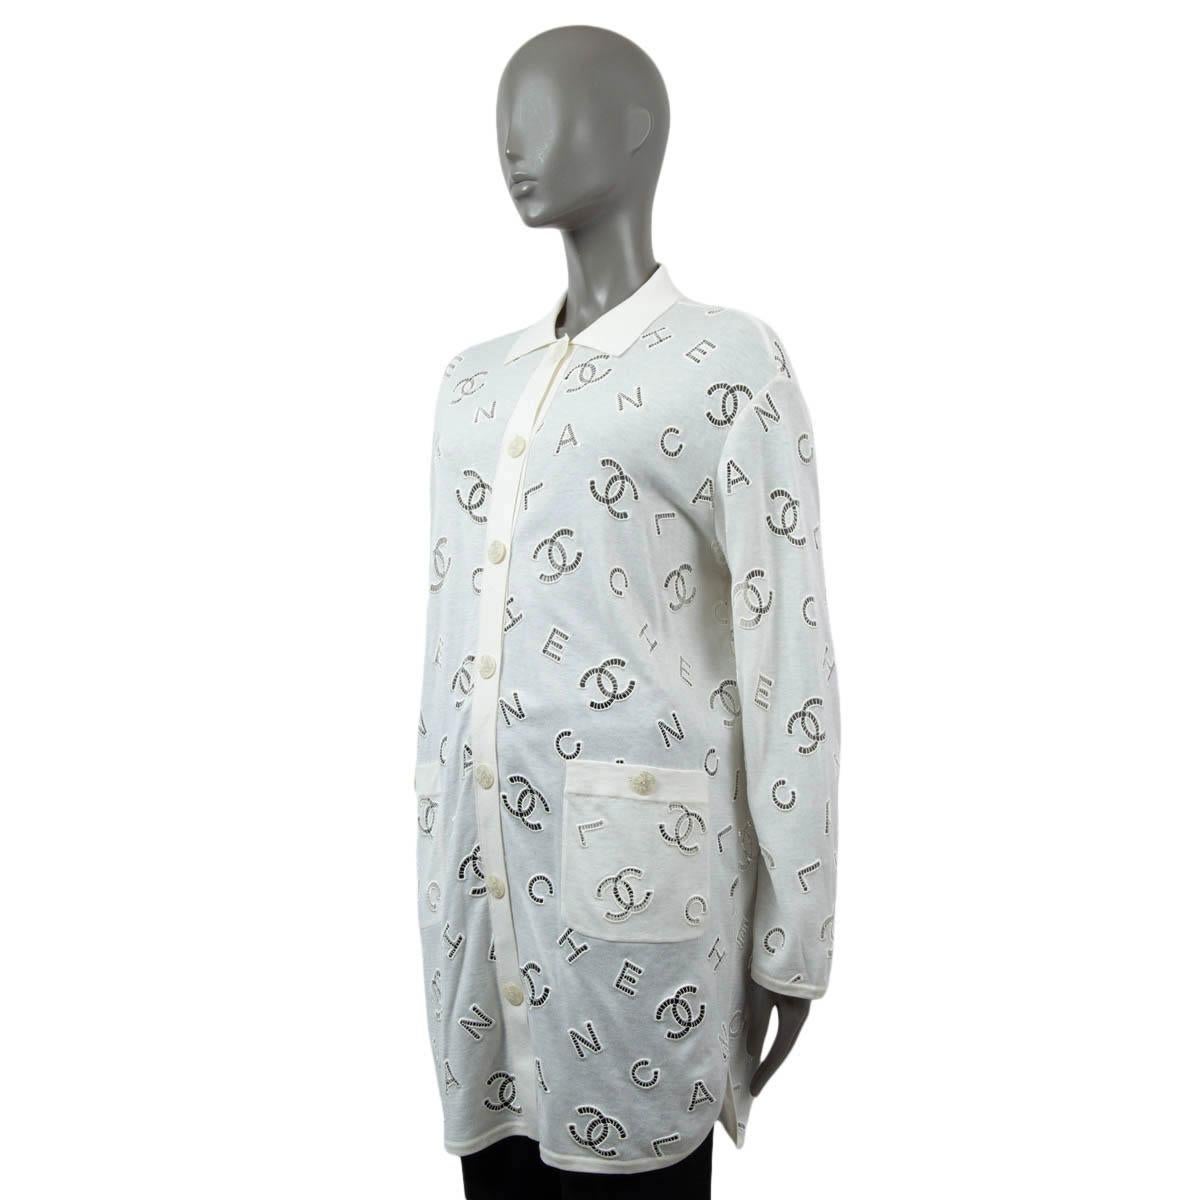 CHANEL ivory cotton 2020 20C LOGO EMBROIDERED Cardigan Sweater 38 S 1